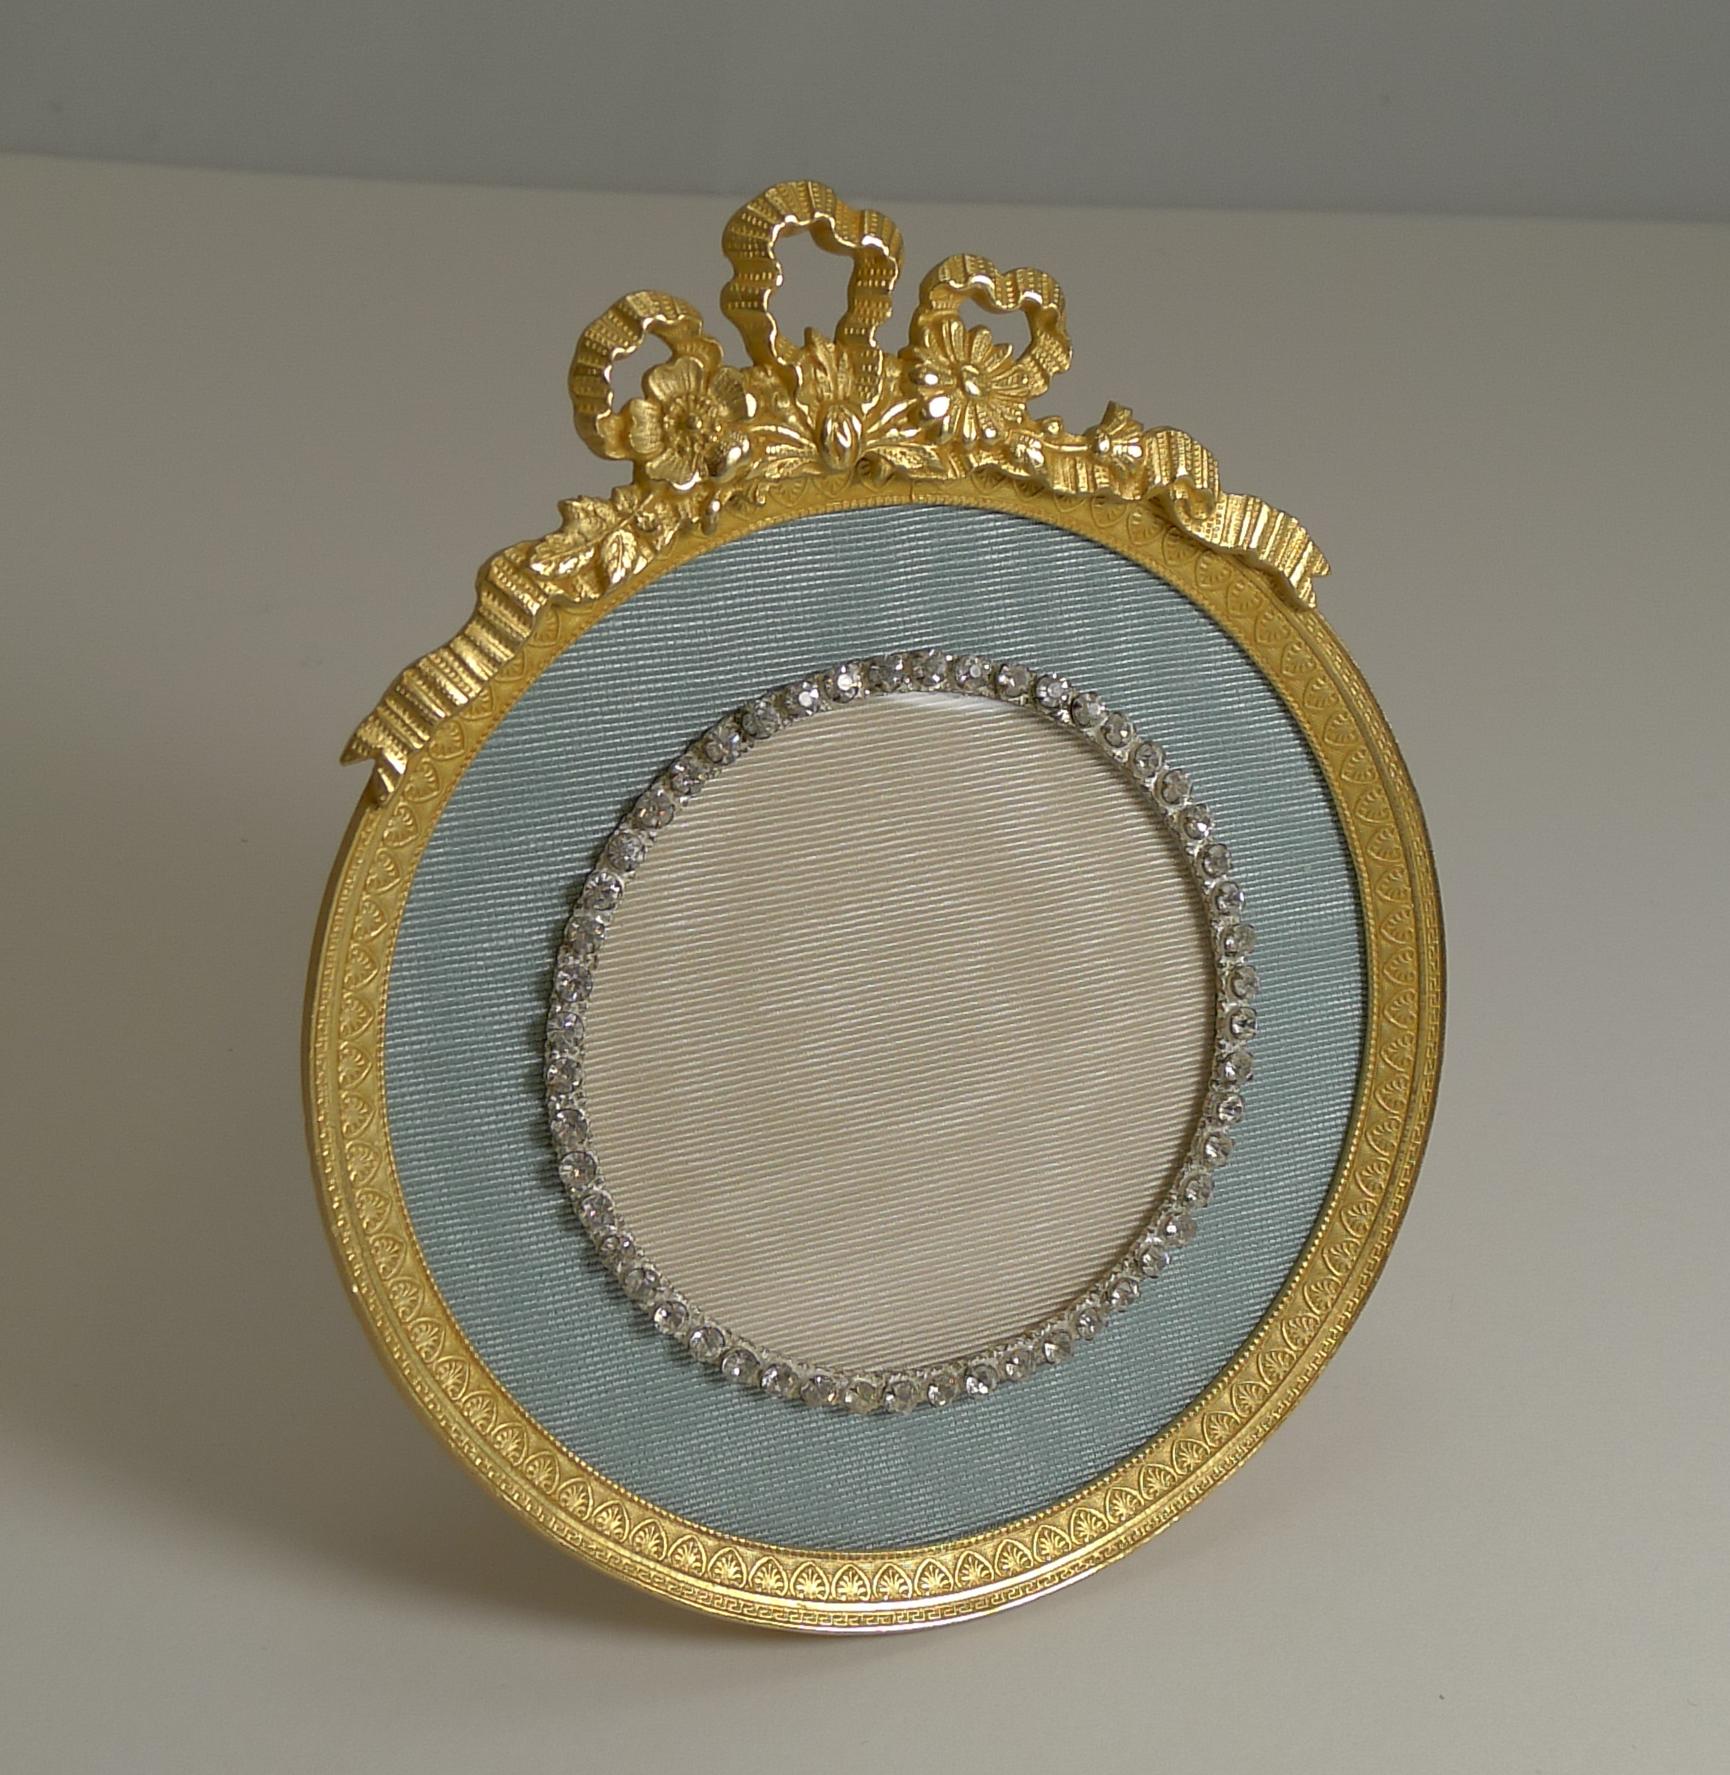 A stunning Ormolu photograph frame restored to it's former glory, dating from circa 1900.

The central circular aperture (measuring 2 3/4